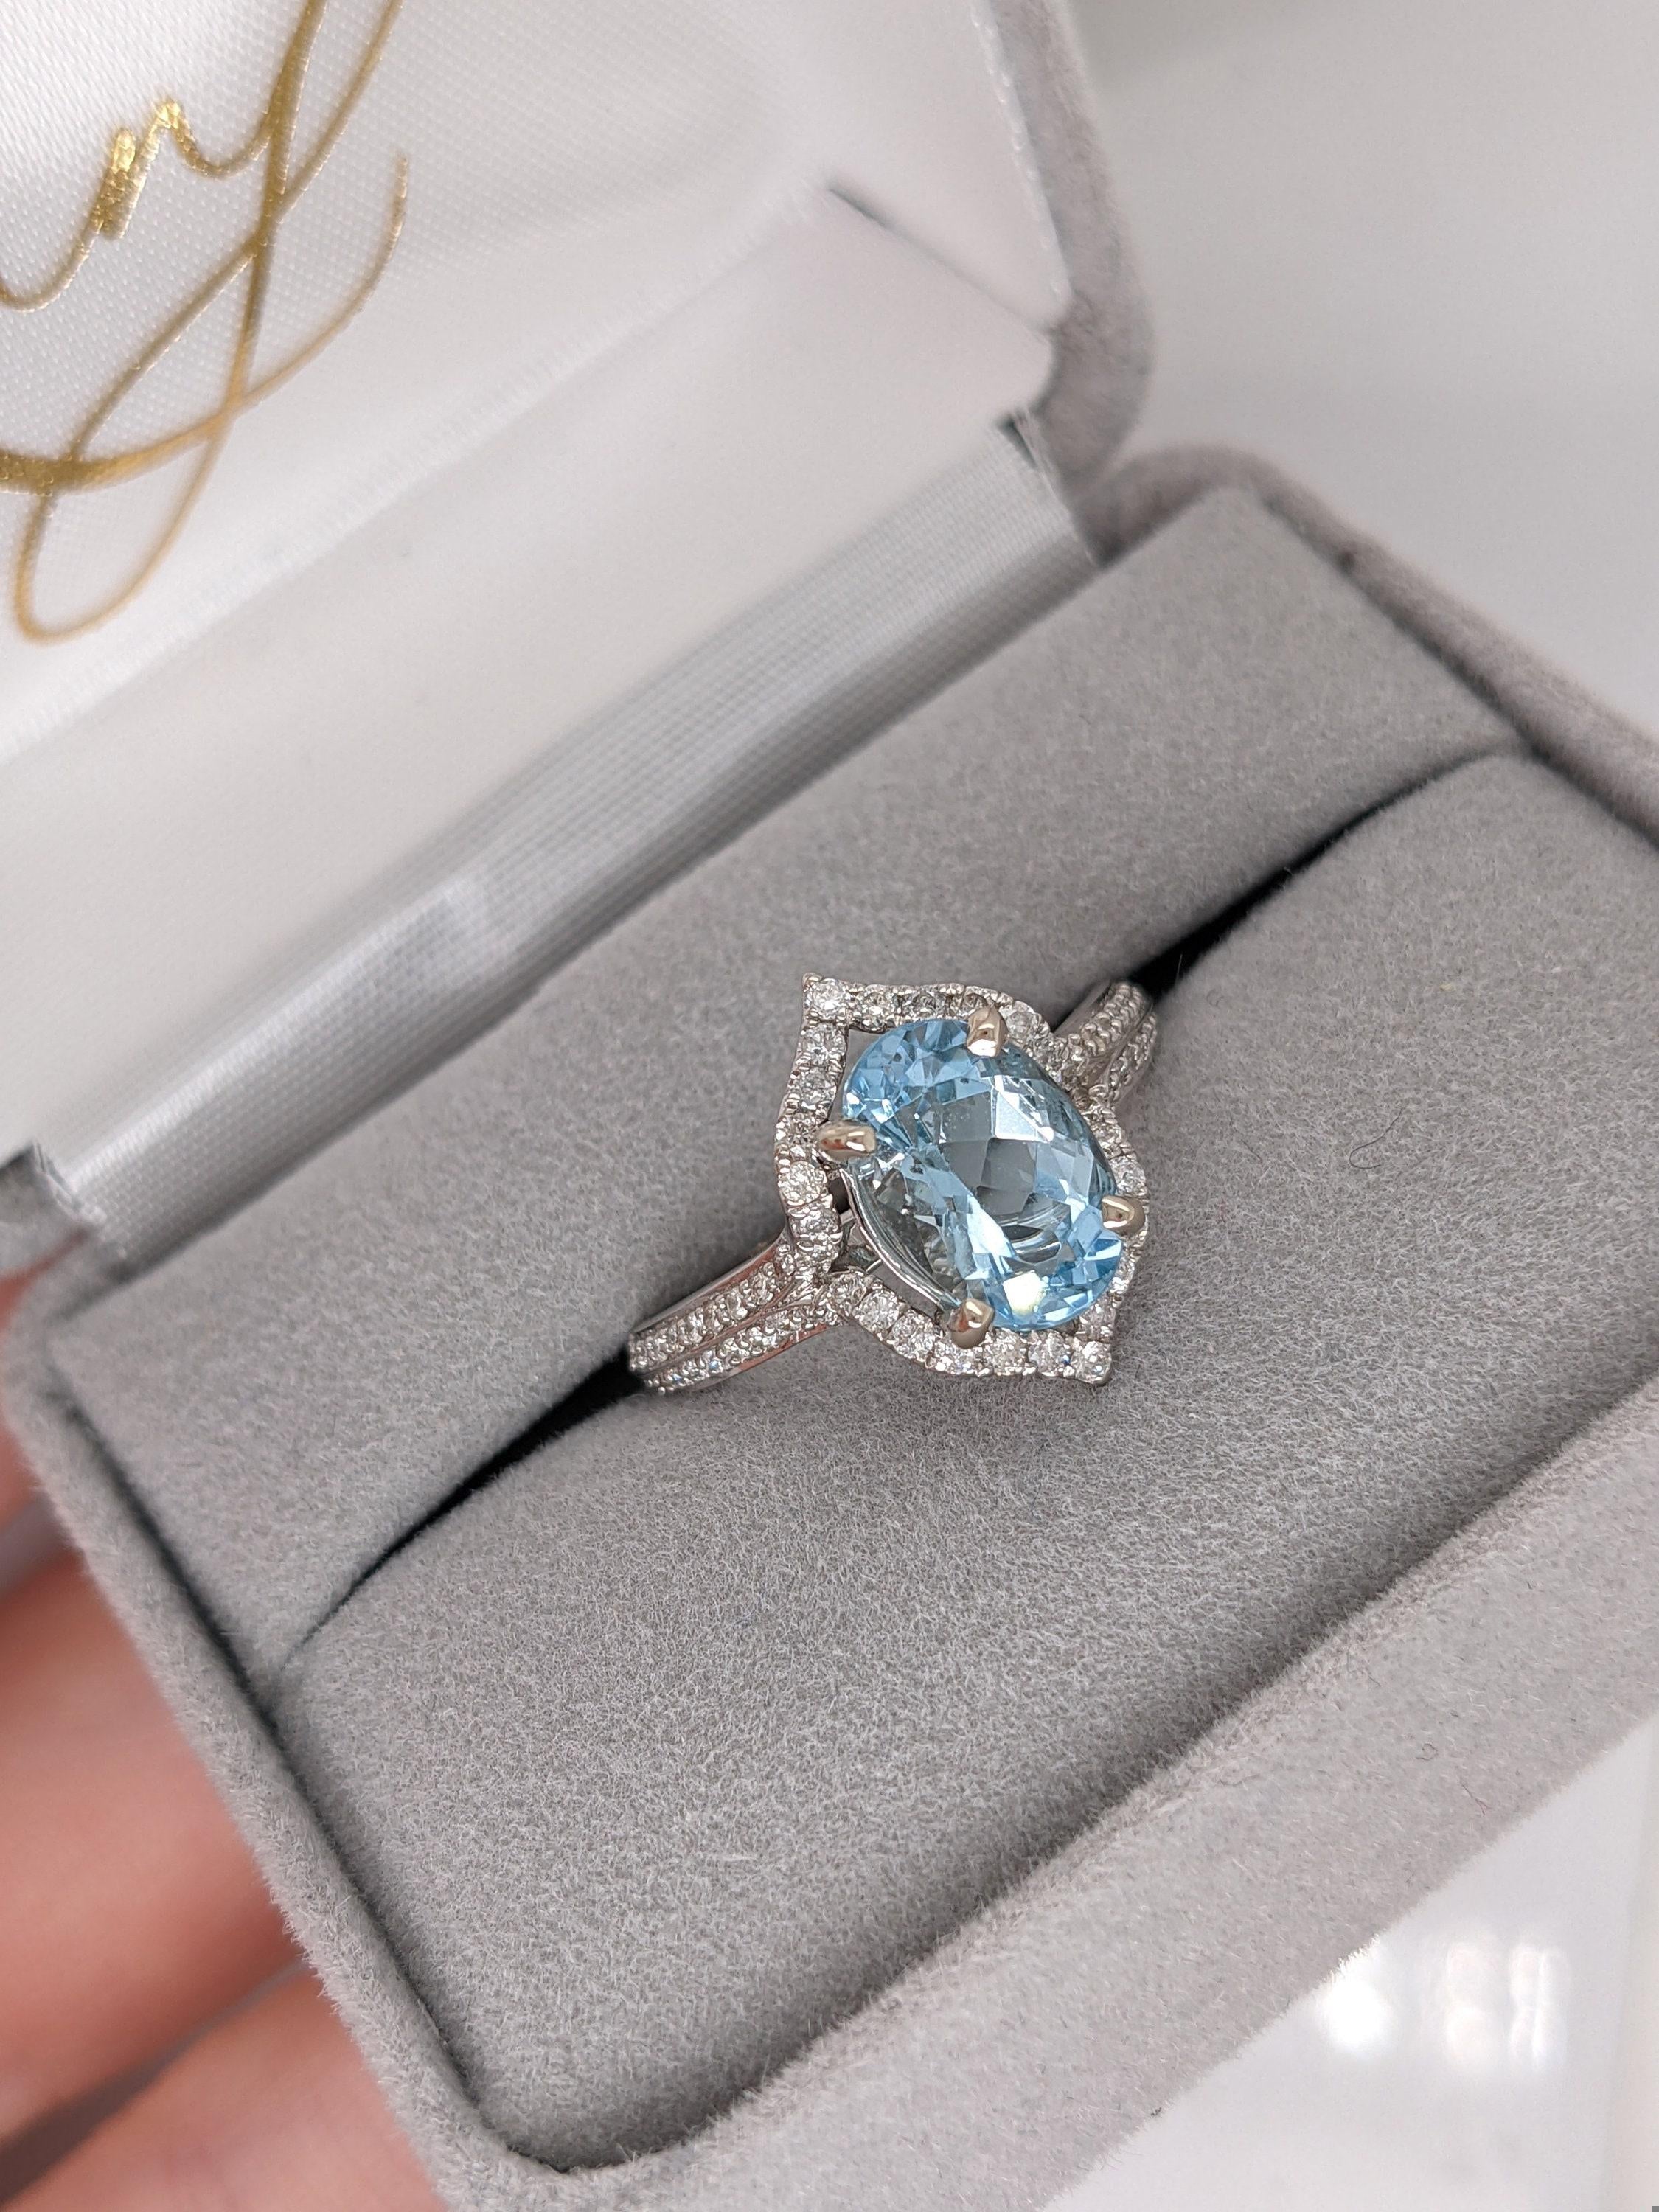 1.8ct Aquamarine Ring w Earth Mined Diamonds in Solid 14k Gold Oval 9x7mm